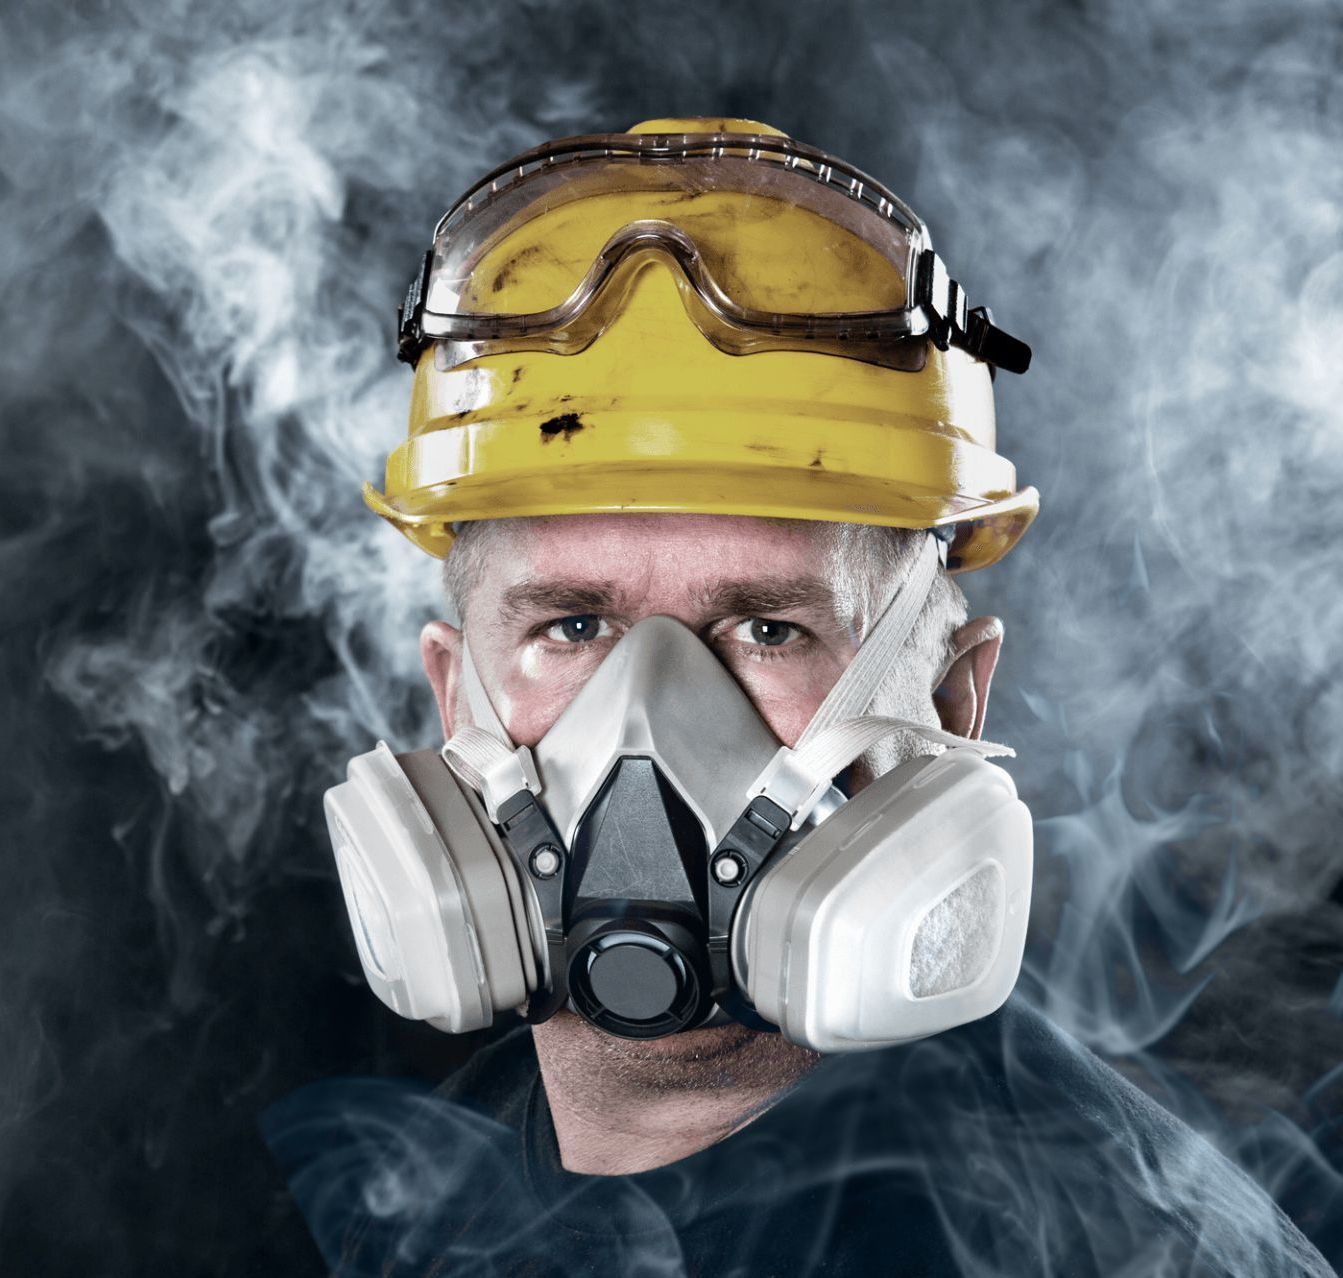 A man wearing a hard hat and gas mask is surrounded by smoke.